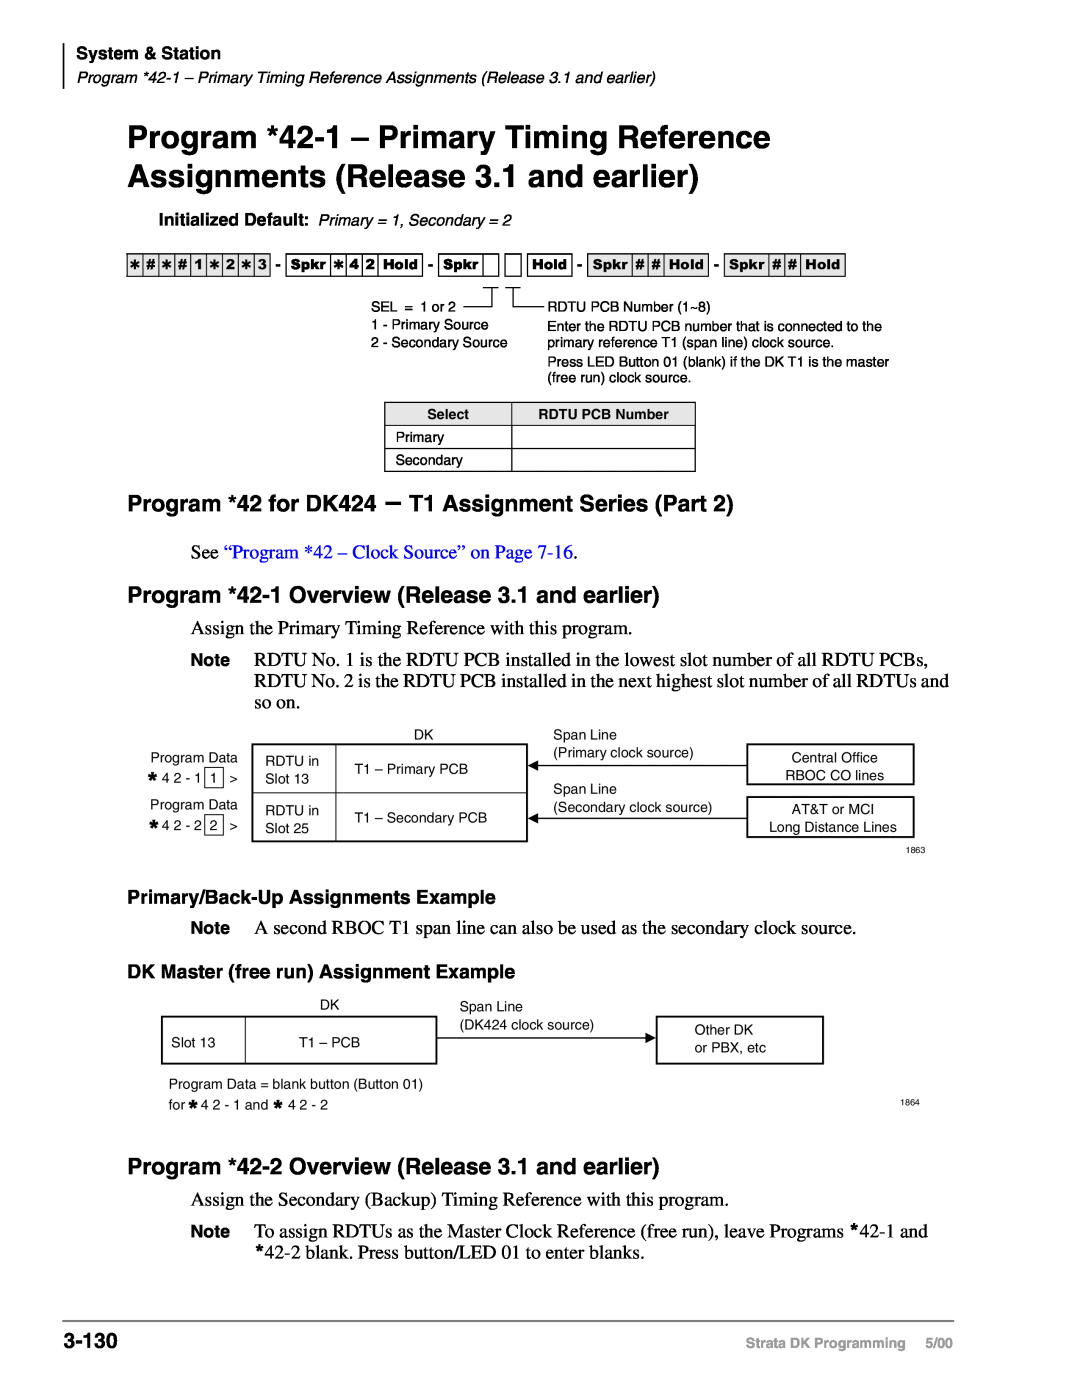 Toshiba DK40I Program *42 for DK424 – T1 Assignment Series Part, Program *42-1Overview Release 3.1 and earlier, 3-130 